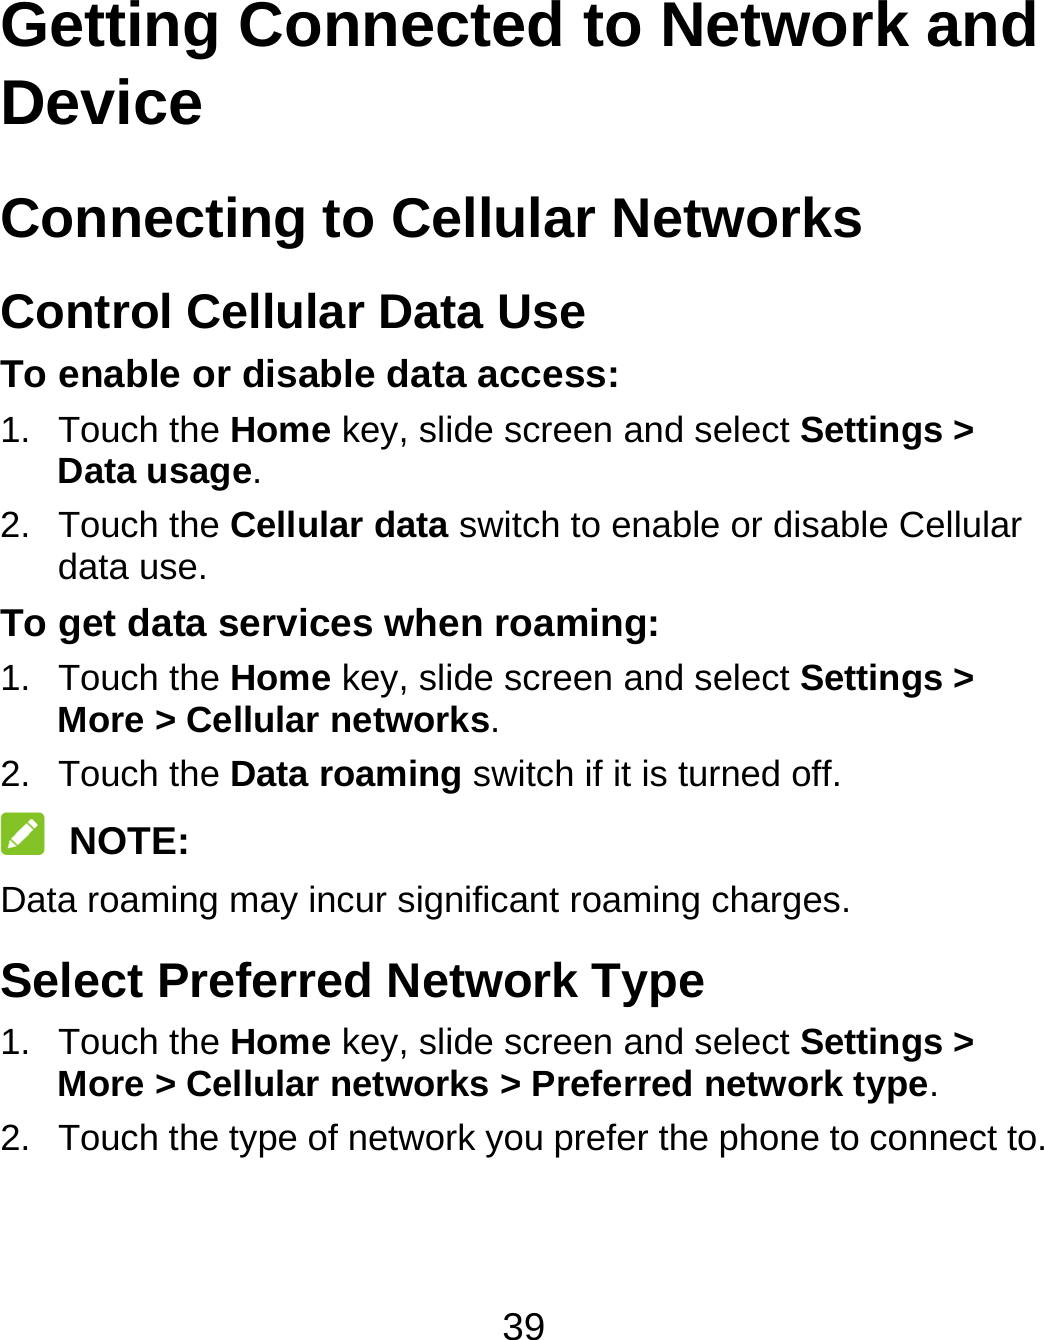 39 Getting Connected to Network and Device  Connecting to Cellular Networks Control Cellular Data Use To enable or disable data access: 1. Touch the Home key, slide screen and select Settings &gt; Data usage. 2. Touch the Cellular data switch to enable or disable Cellular data use. To get data services when roaming: 1. Touch the Home key, slide screen and select Settings &gt; More &gt; Cellular networks.  2. Touch the Data roaming switch if it is turned off.  NOTE: Data roaming may incur significant roaming charges. Select Preferred Network Type 1. Touch the Home key, slide screen and select Settings &gt; More &gt; Cellular networks &gt; Preferred network type. 2.  Touch the type of network you prefer the phone to connect to. 